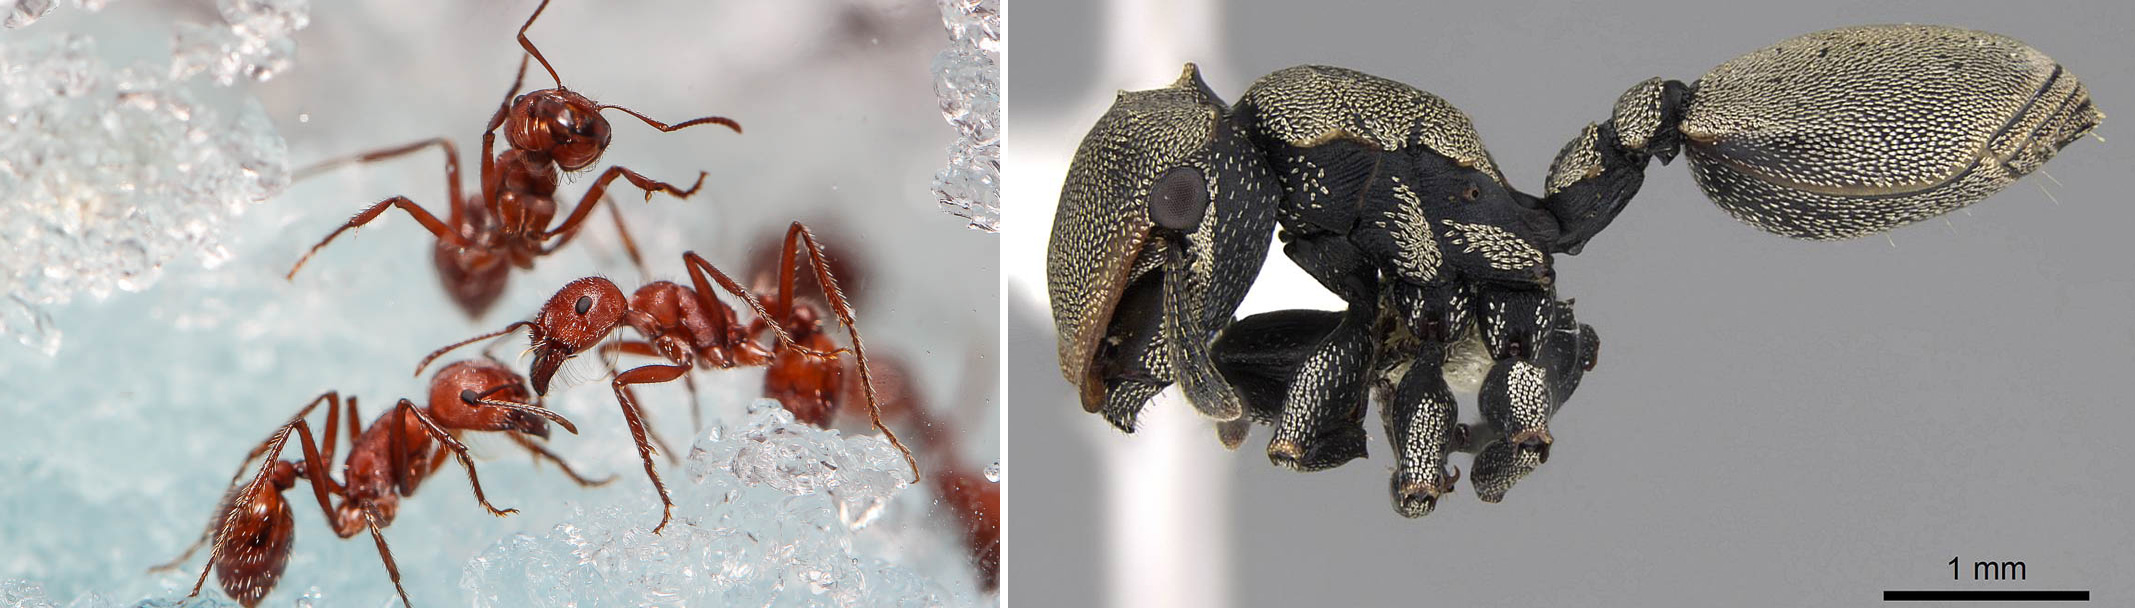 Photos show representatives of two ant species.